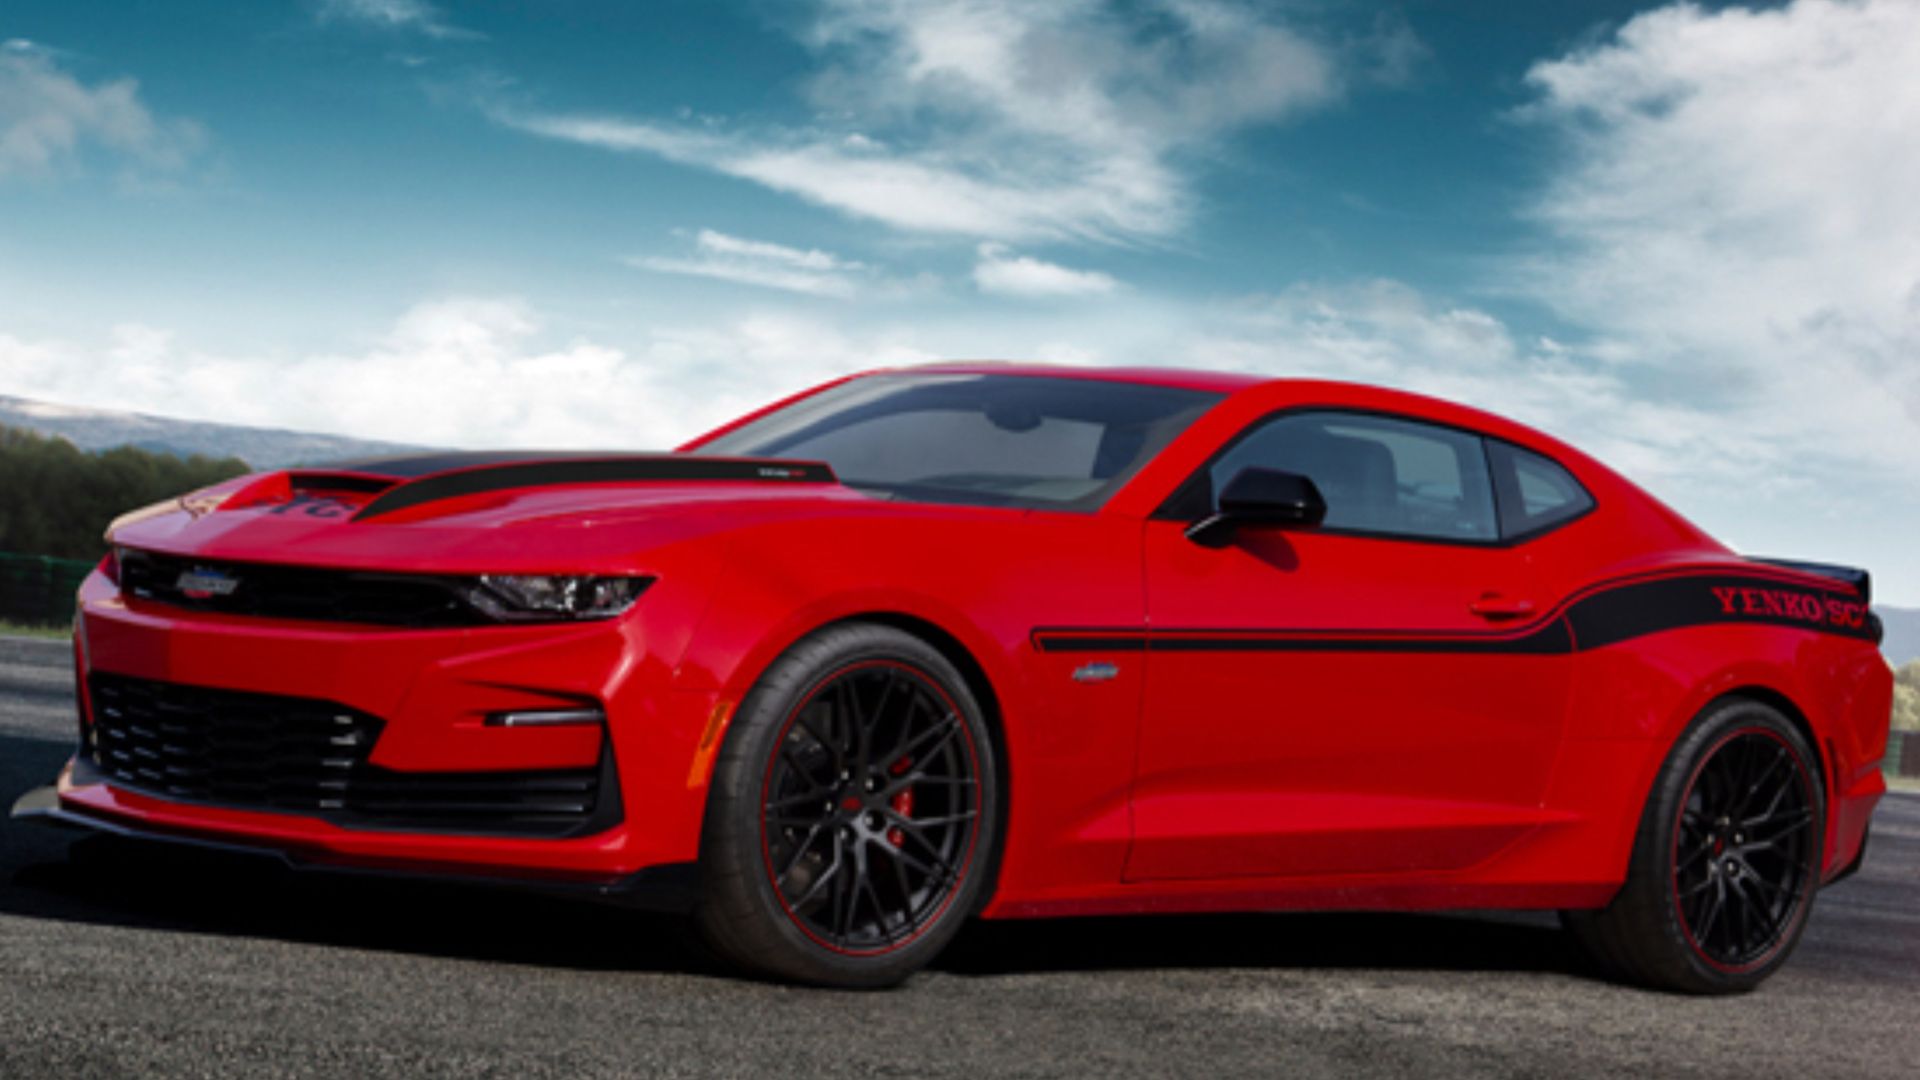 10 Things You Need To Know About The Rumored Chevy Camaro SUV